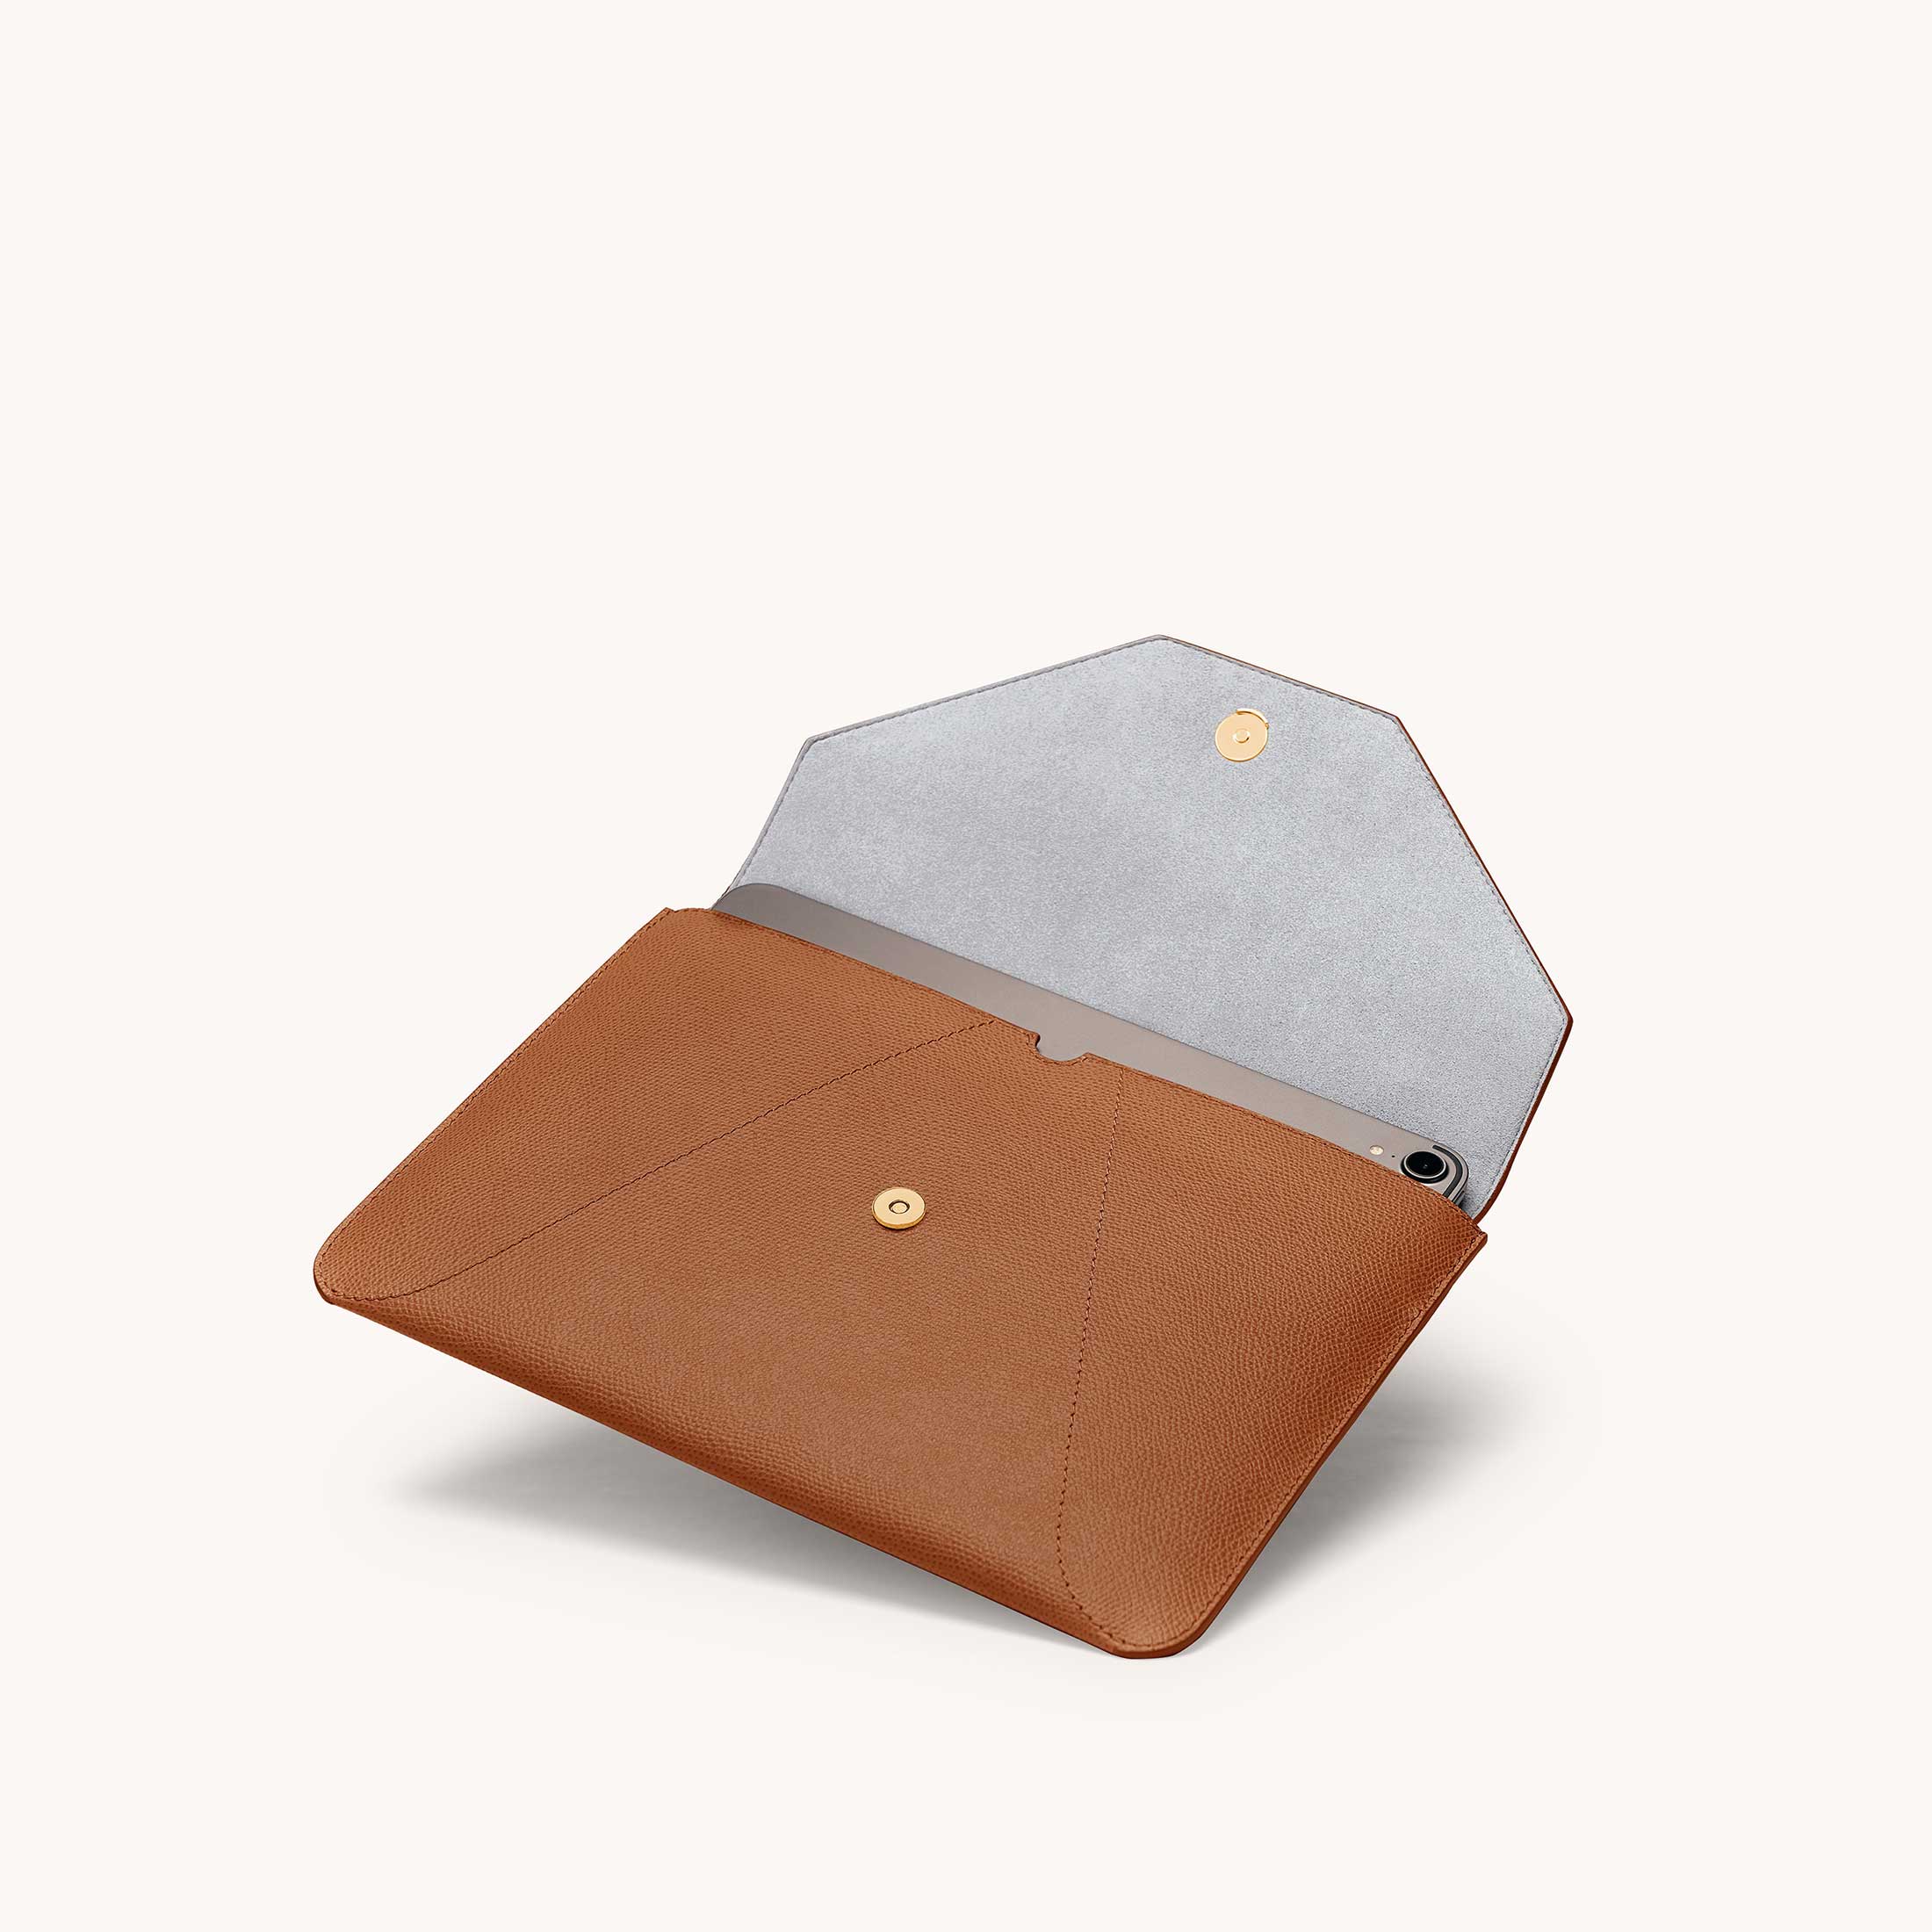 Mini envelope sleeve in chestnut angled view with flap open.